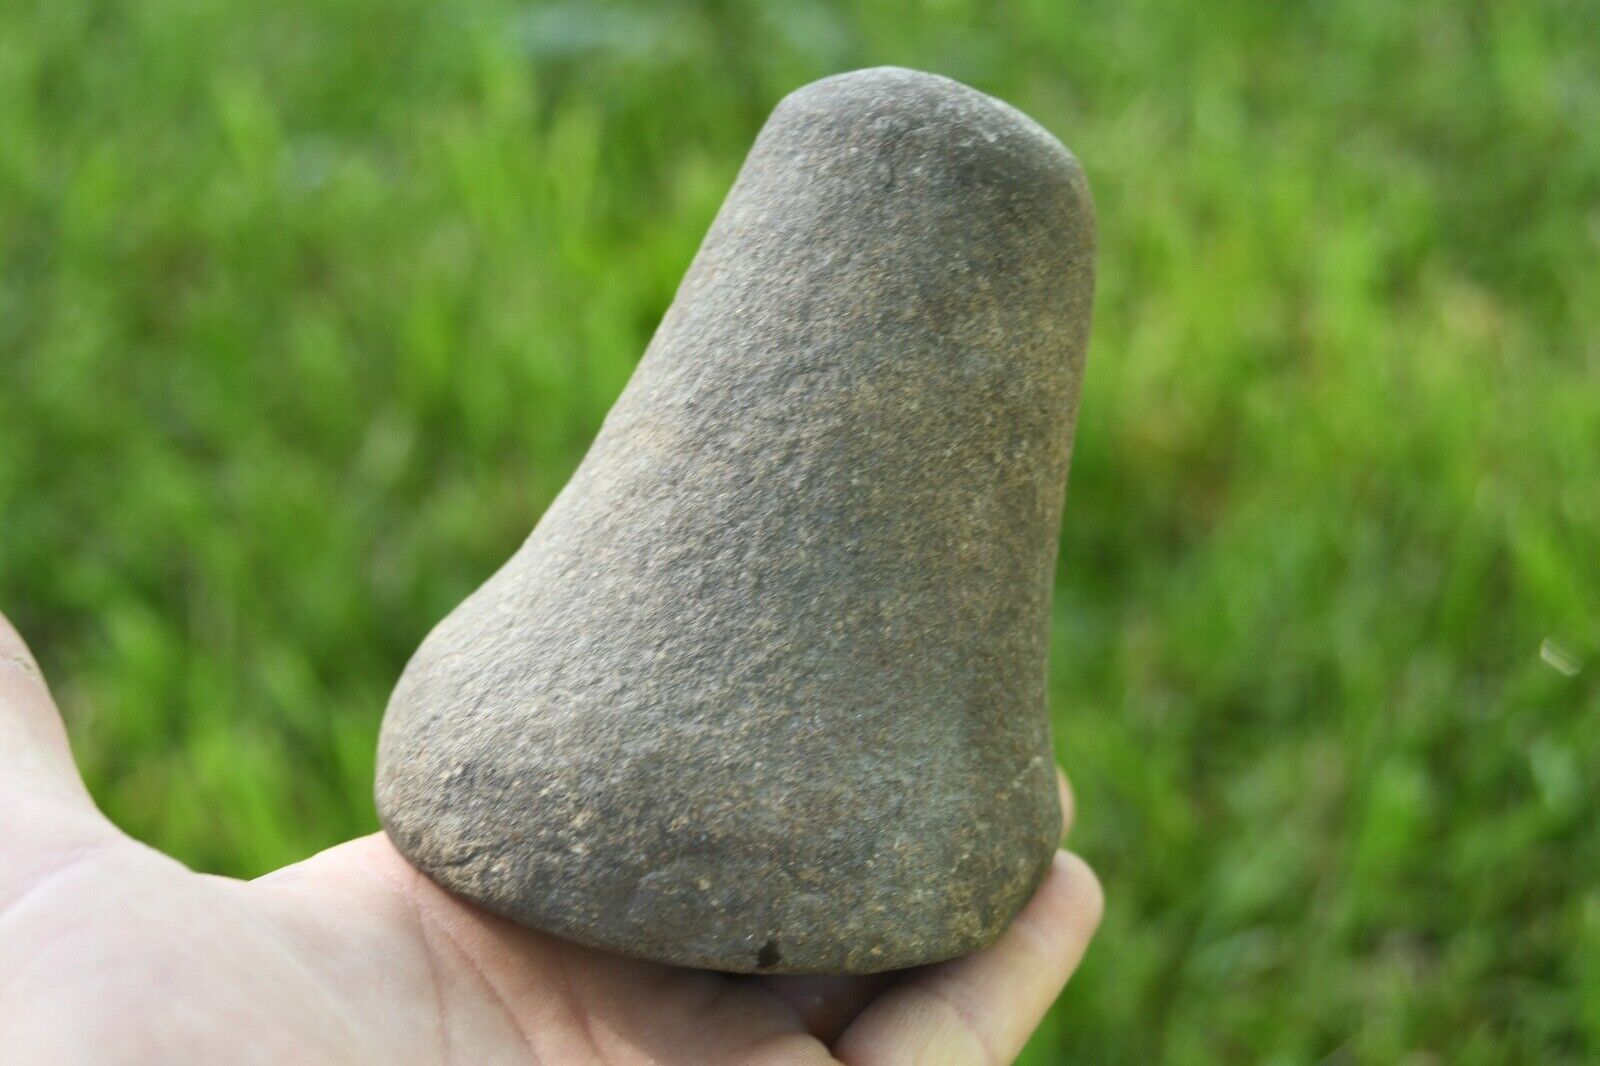 Well made native american quartzite bell pestle artifact from Ohio